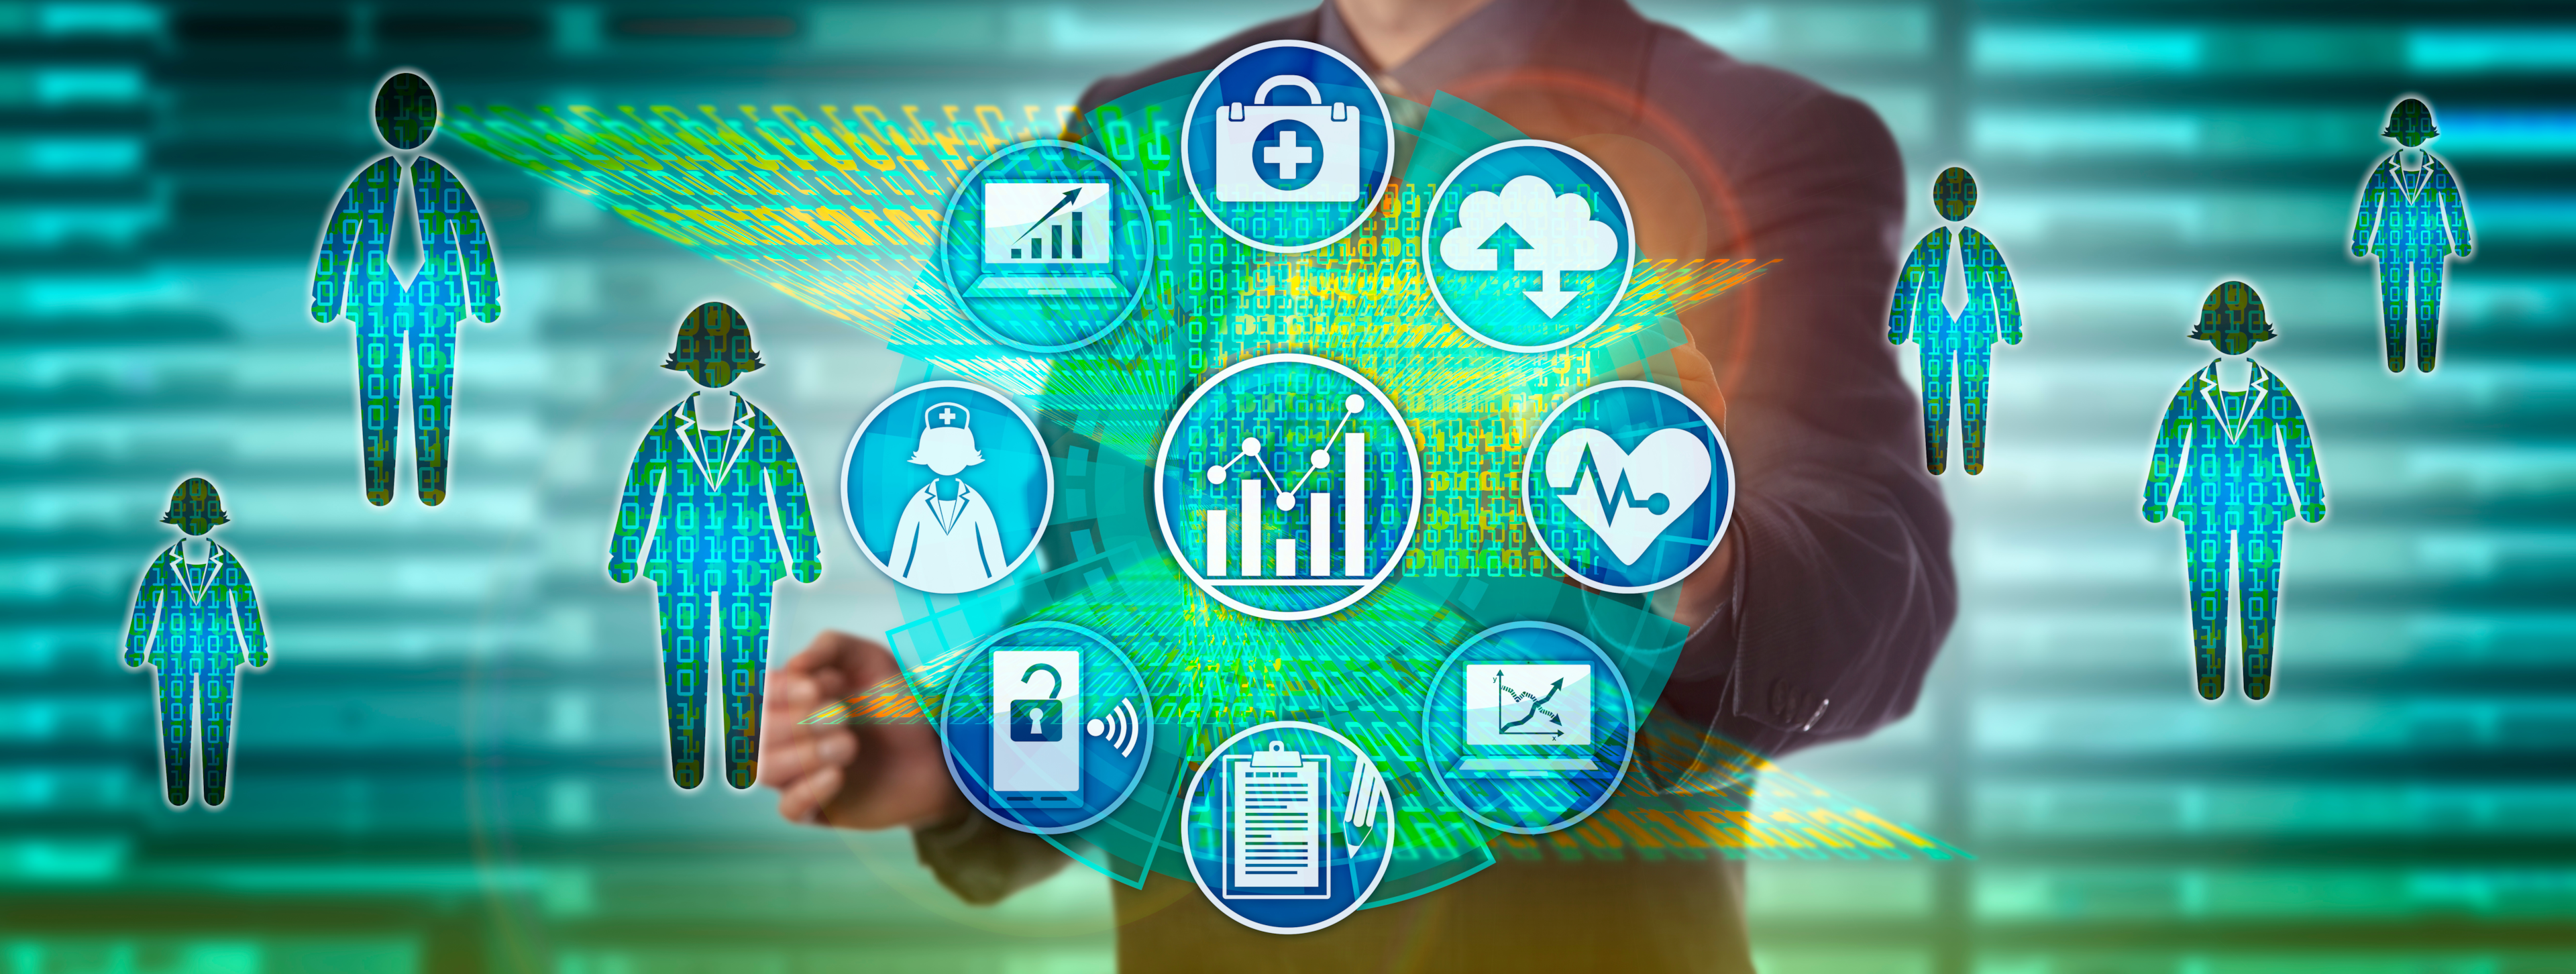 remote patient monitoring and chronic care management for population health in 2023